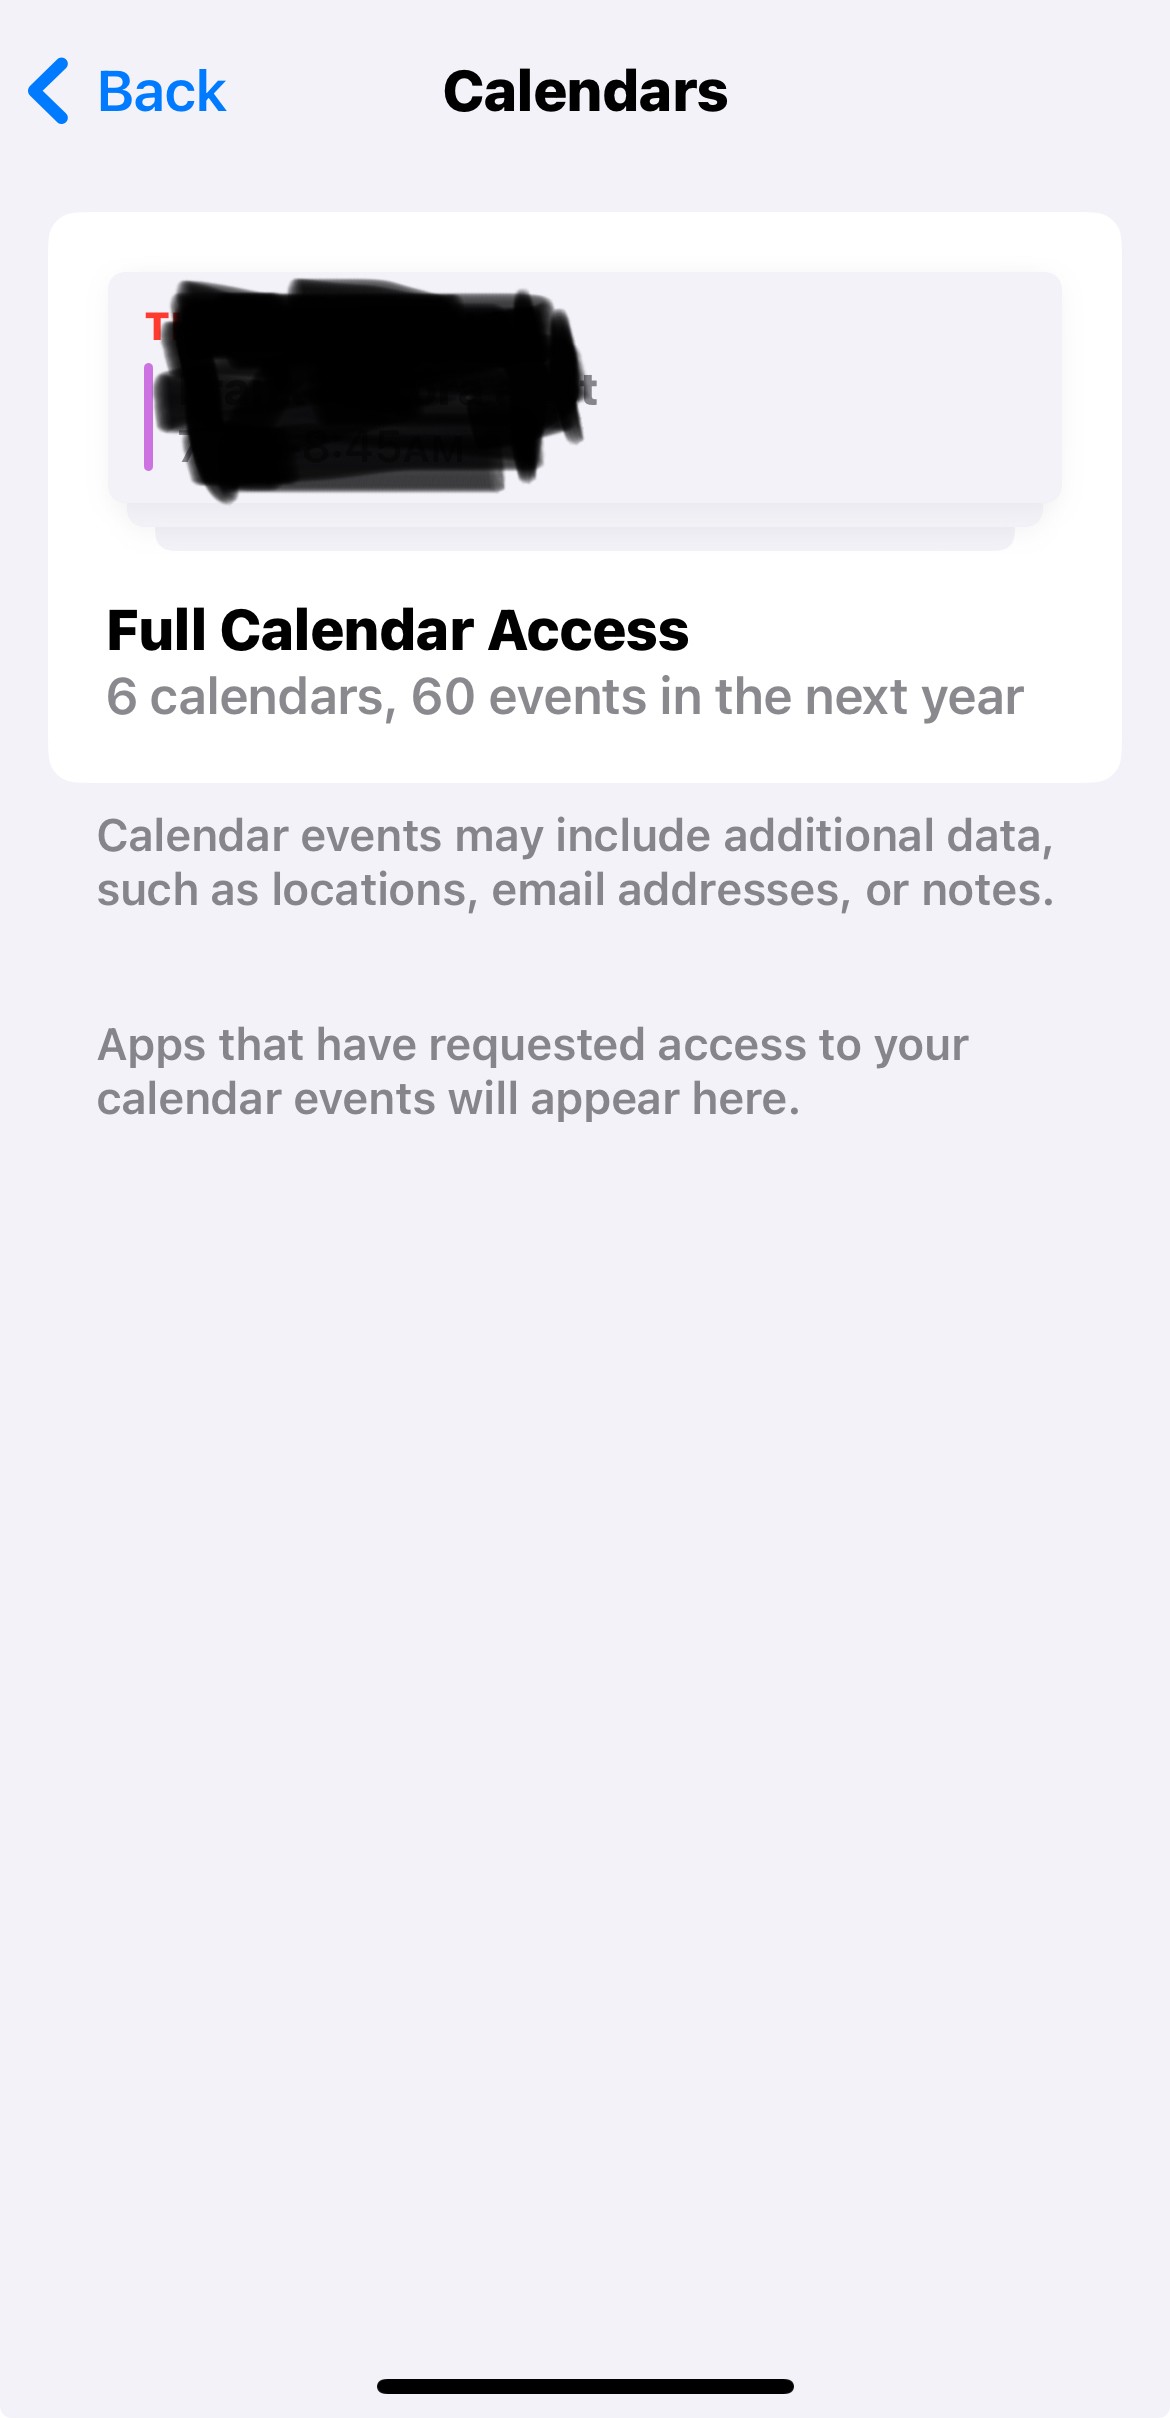 My calendar will not sync after this new Apple Community